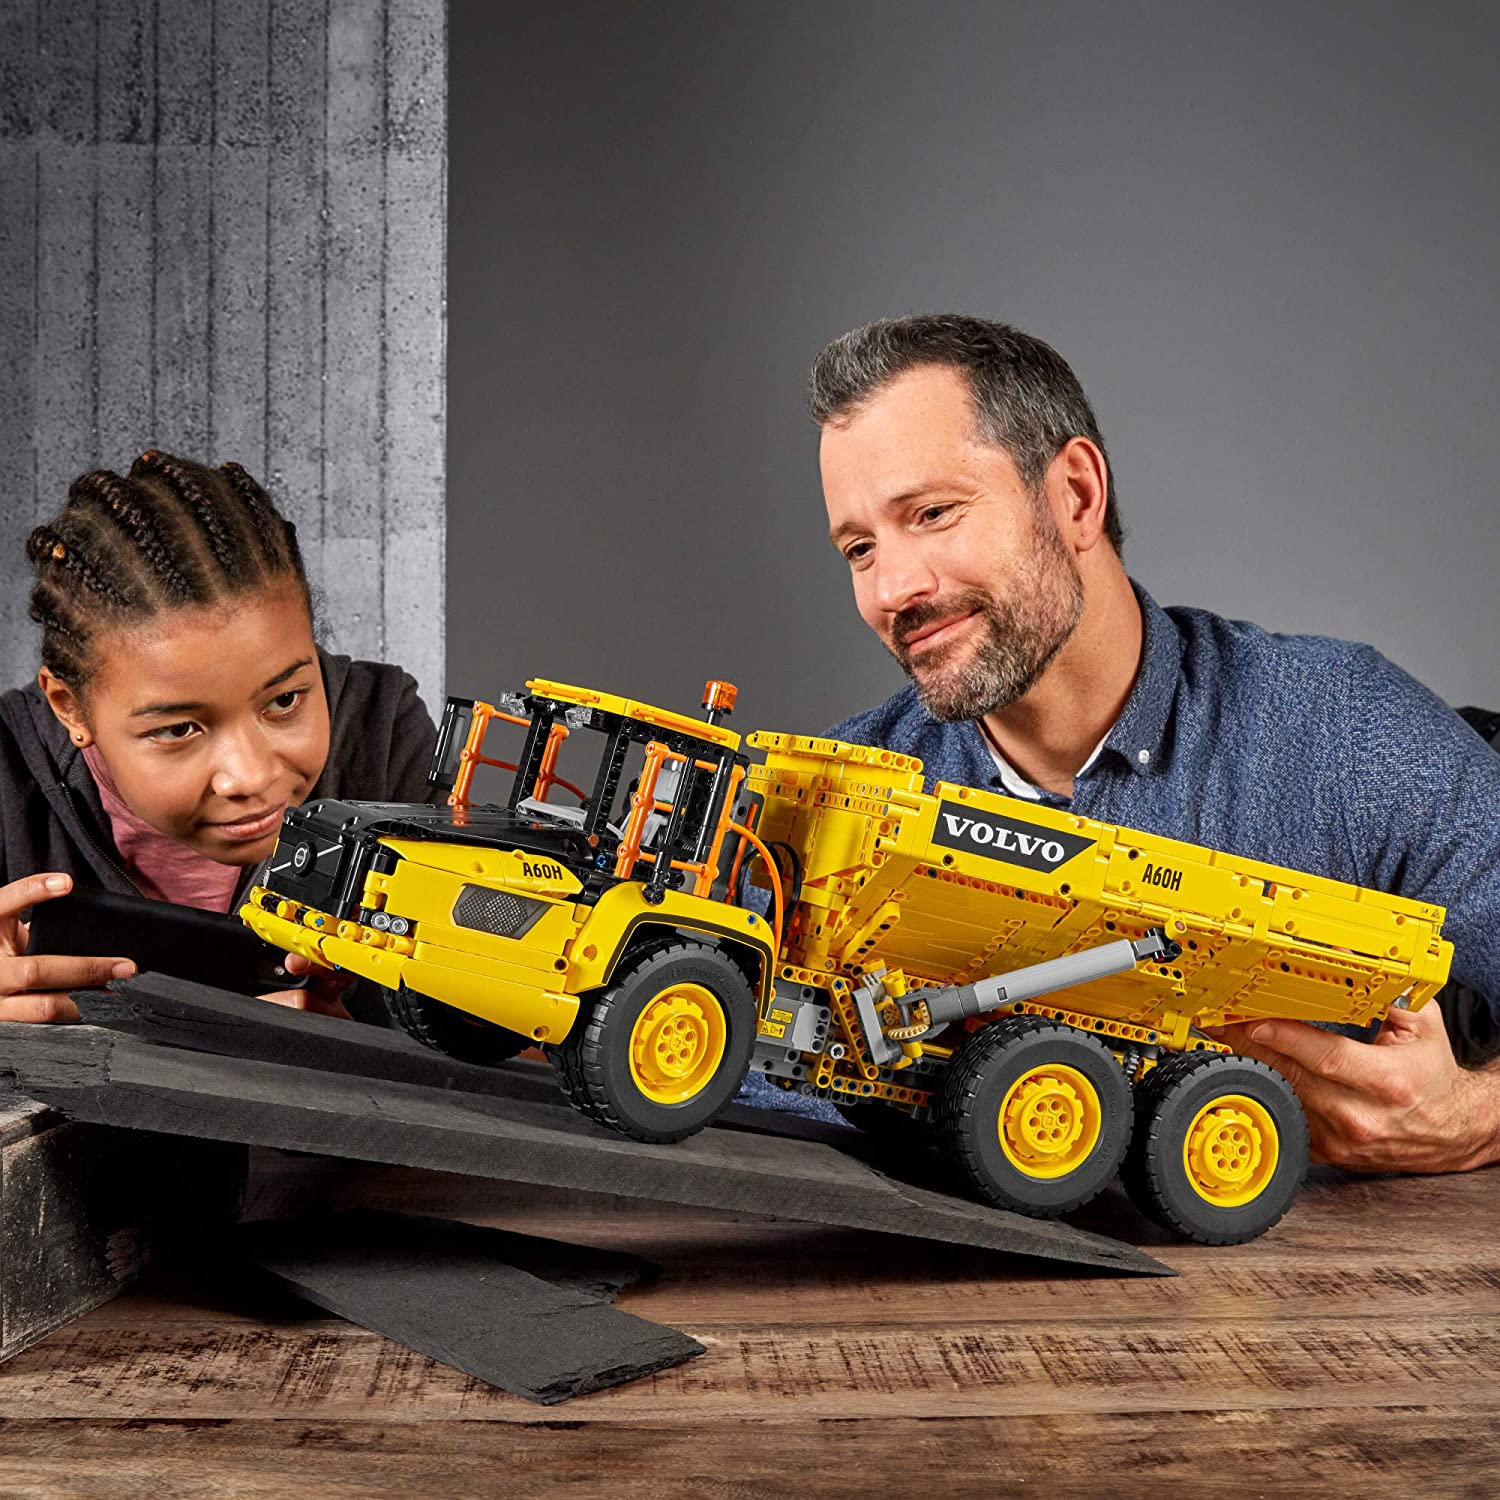 Make Dad Feel Extra Special With Lego Father’s Day Gifts!